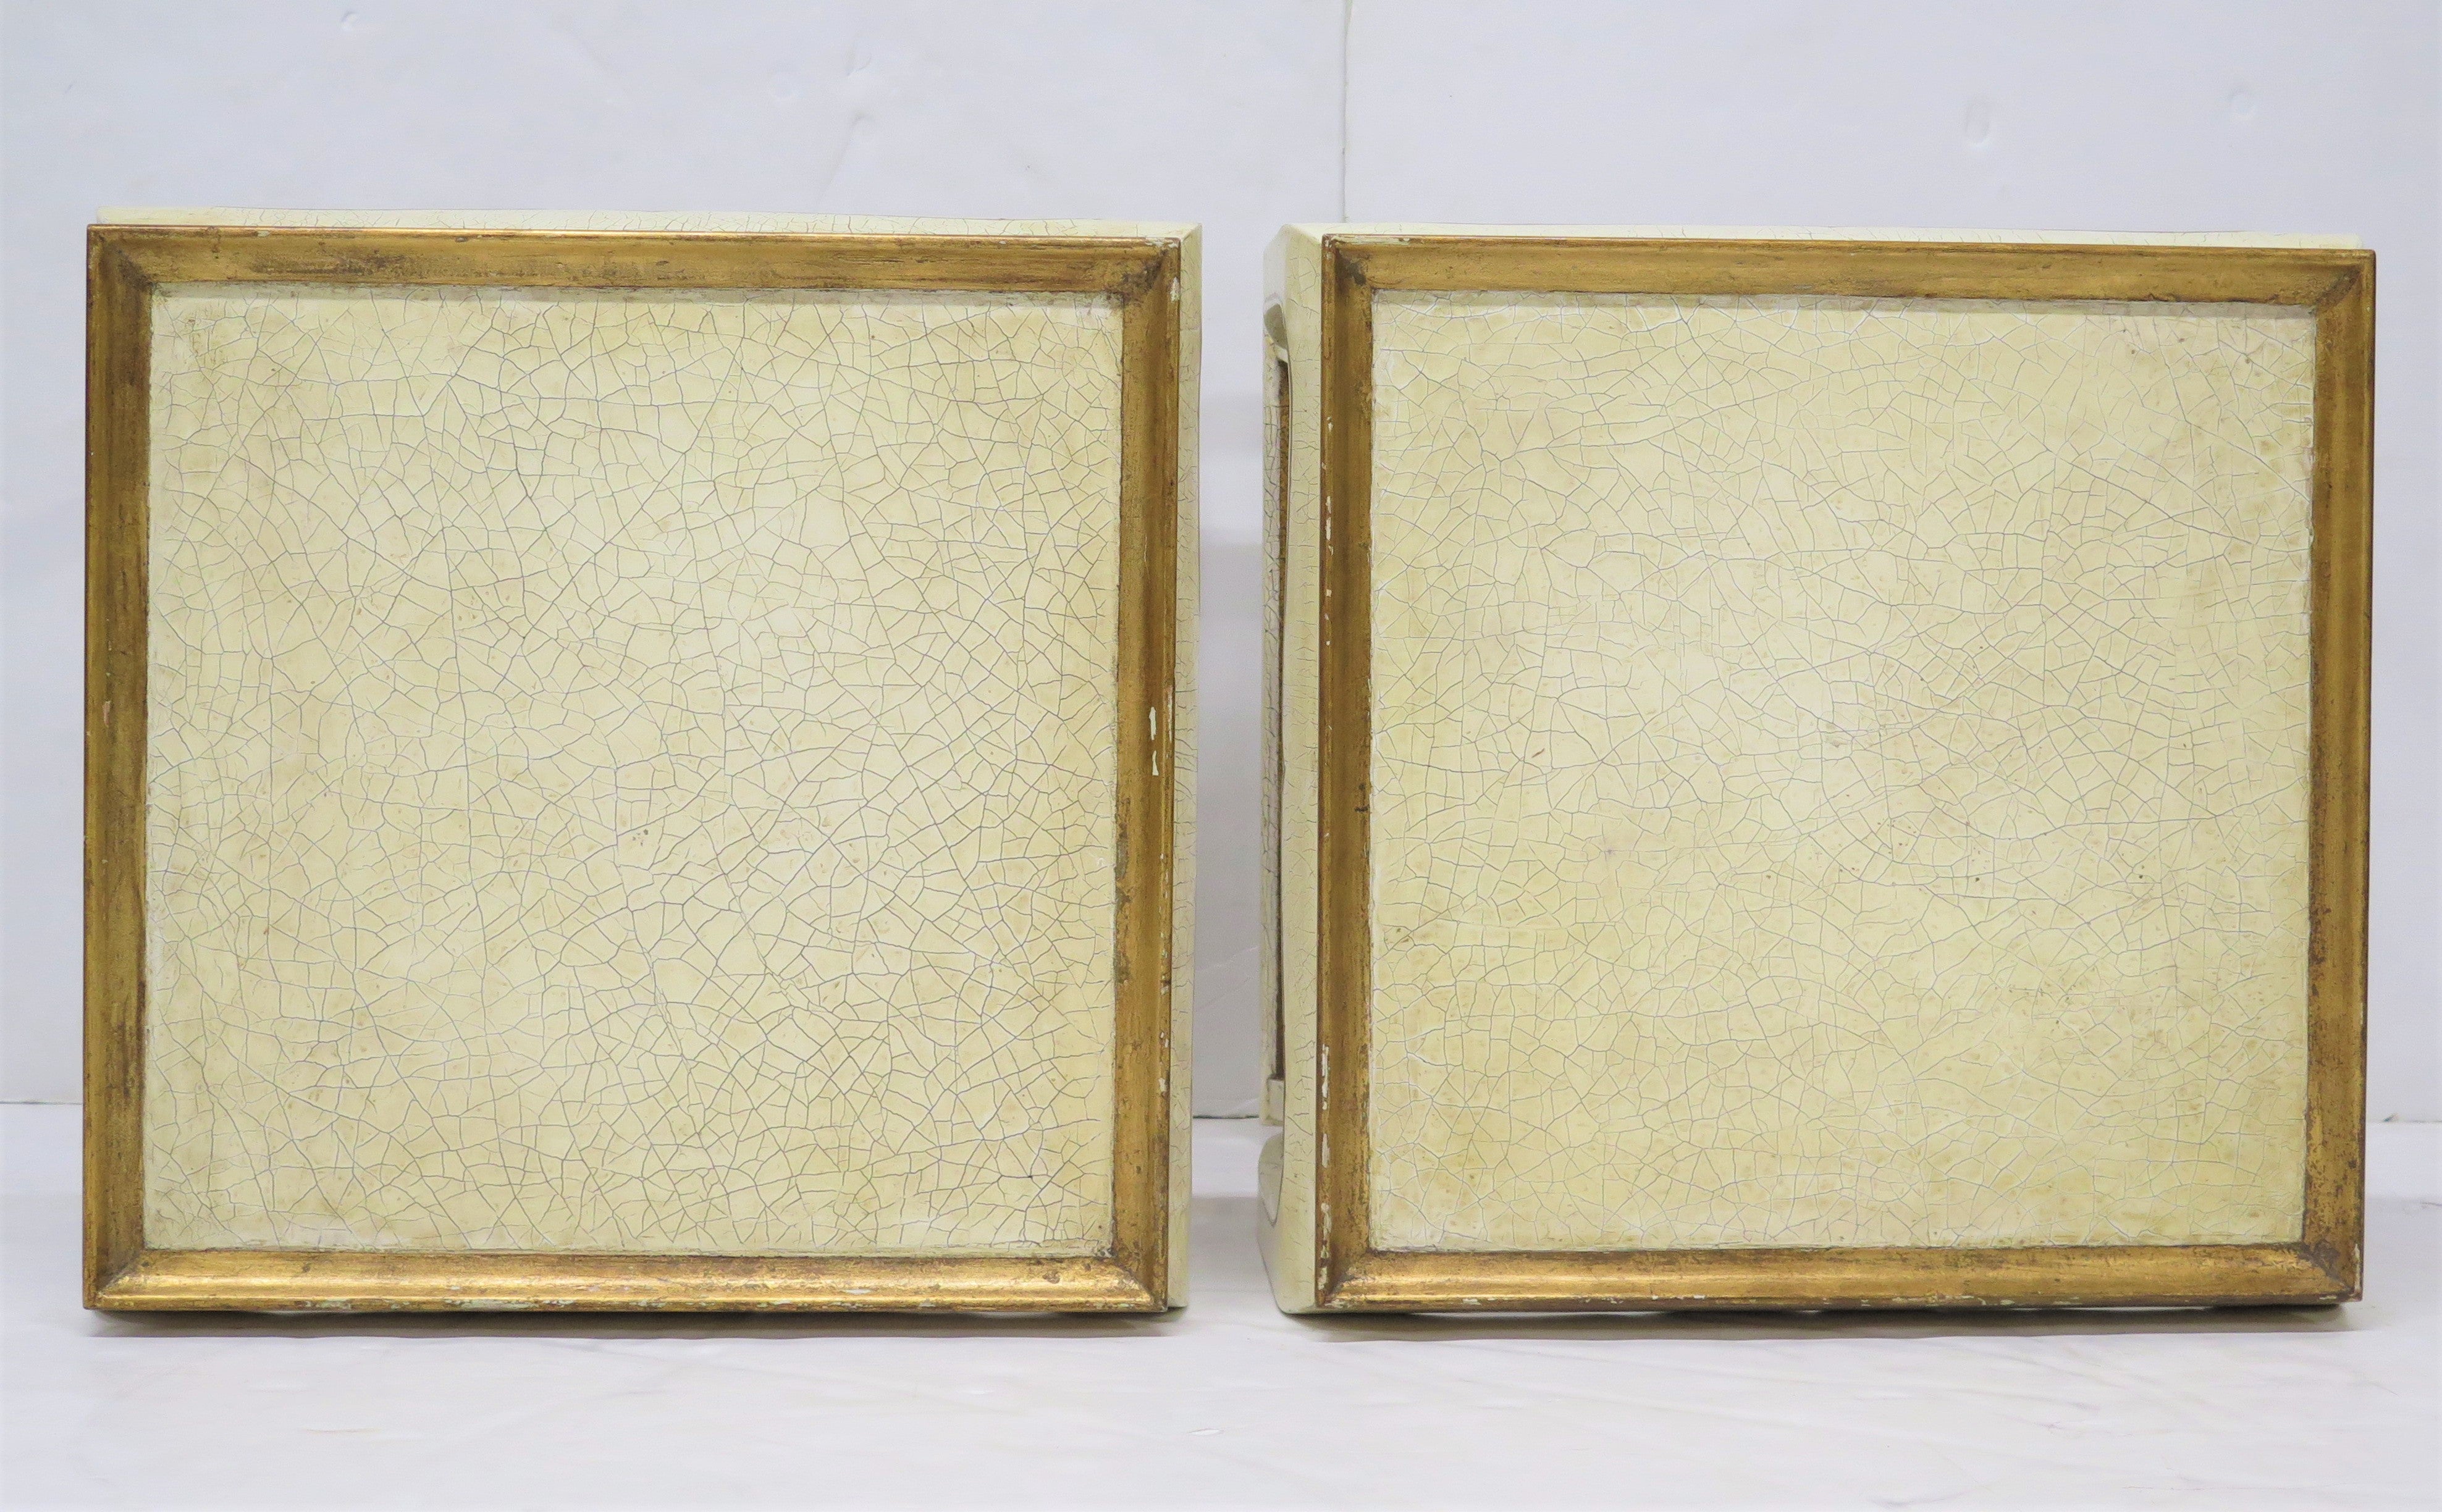 Pair of White and Gold Lacquered Tables